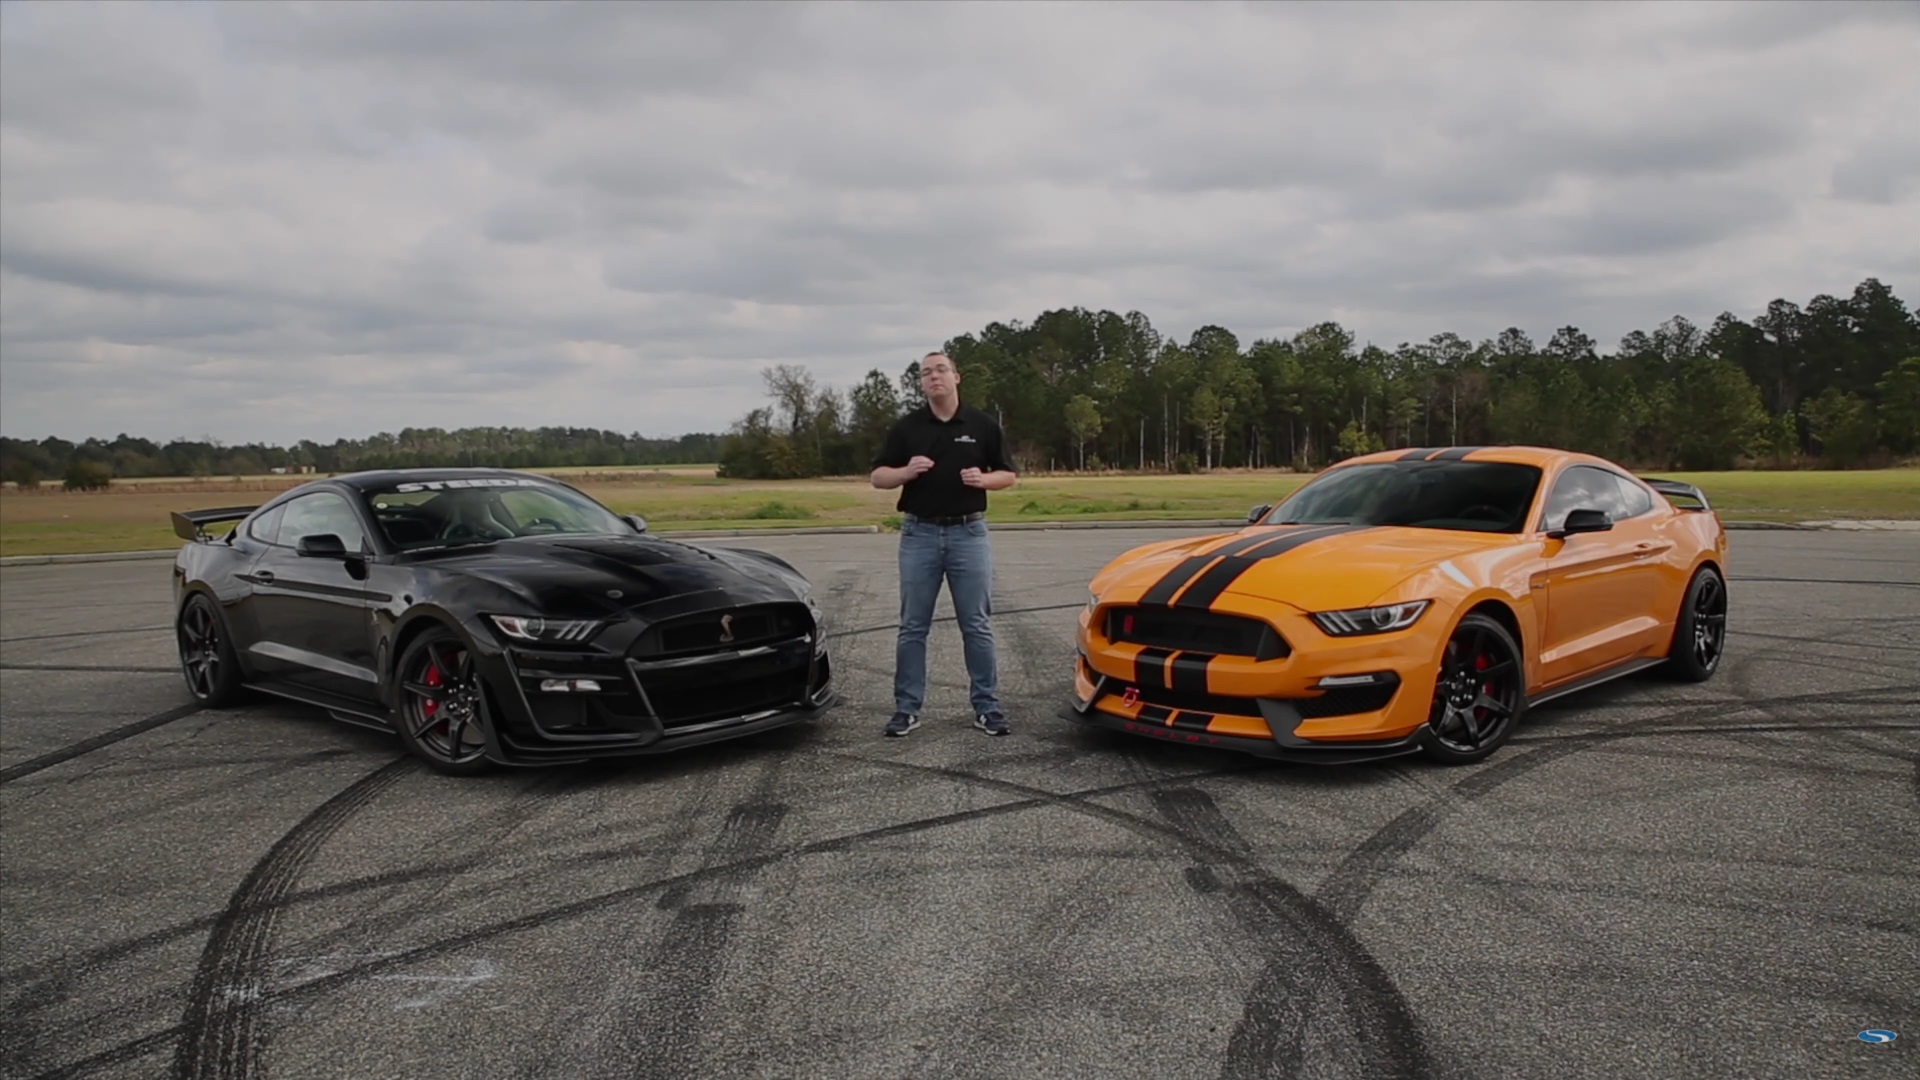 Video: 2019 Ford Mustang Shelby GT350R vs 2020 Shelby GT500 - Comparison & Driving Impressions!